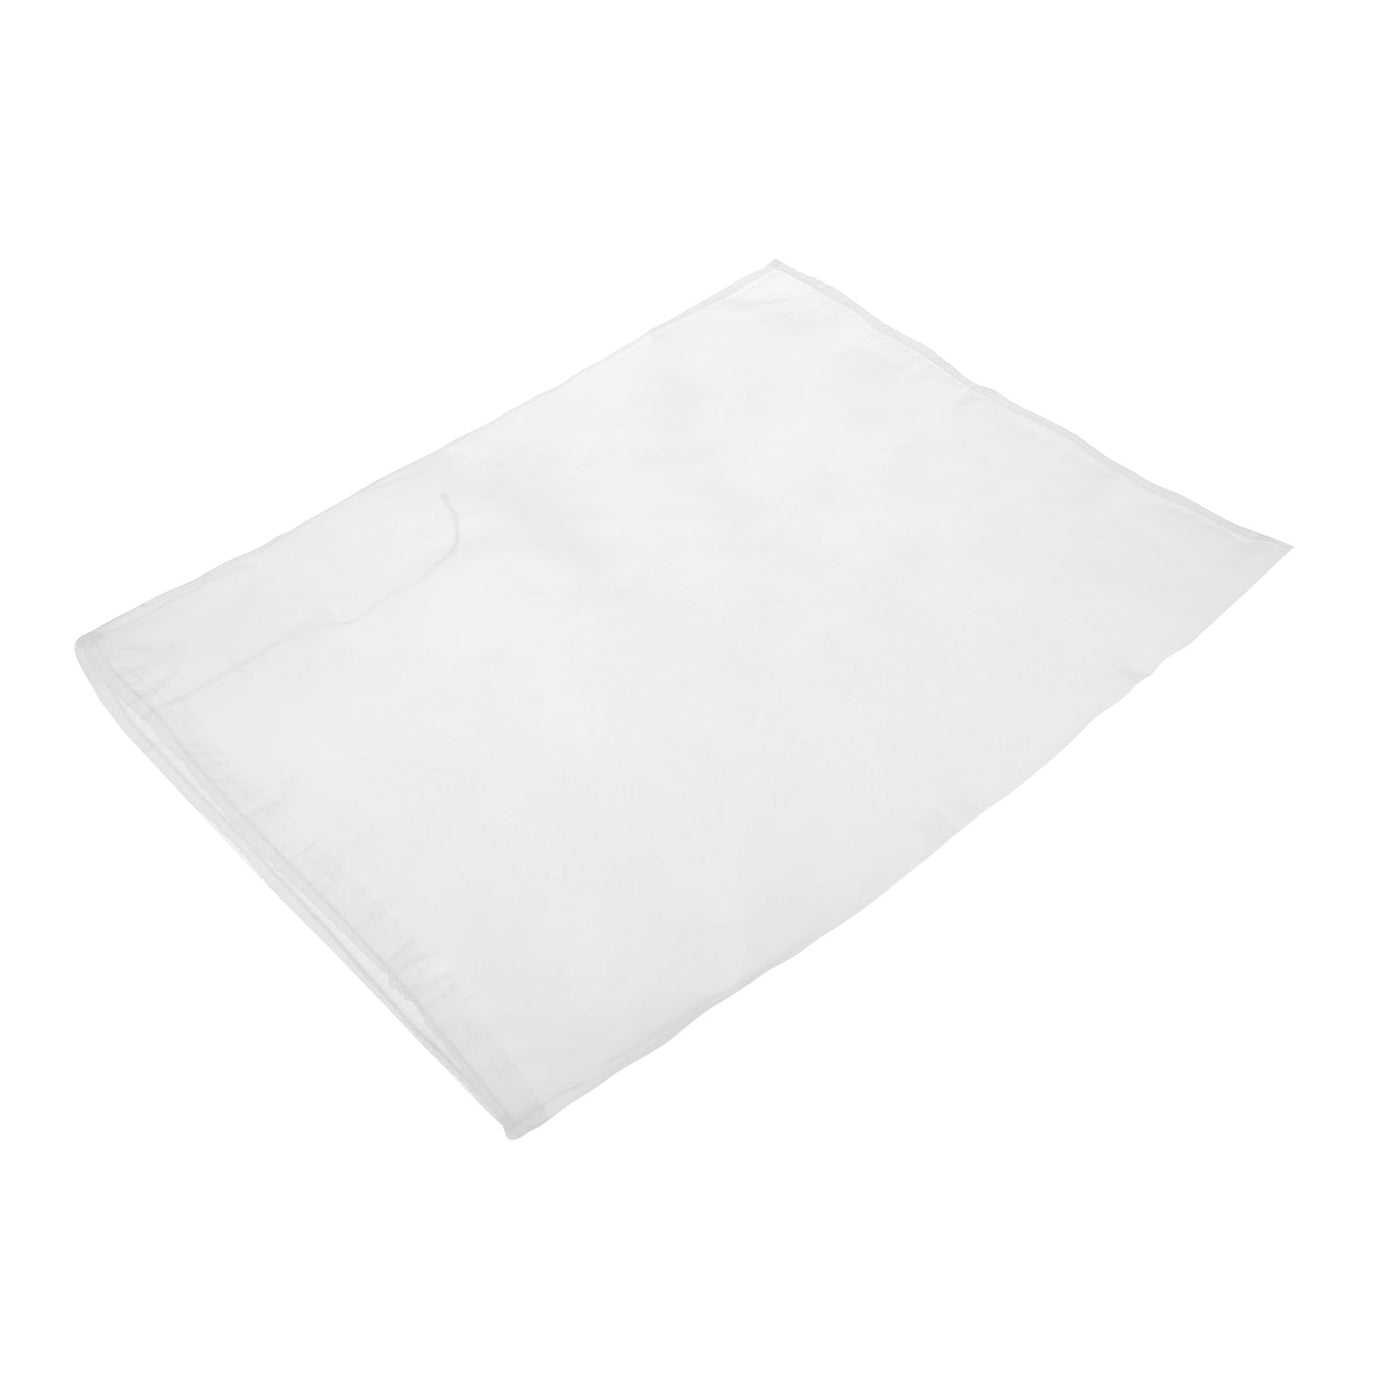 uxcell Uxcell Paint Filter Bag 100 Mesh (23.6"x17.7") Nylon Strainer for Filtering Paint